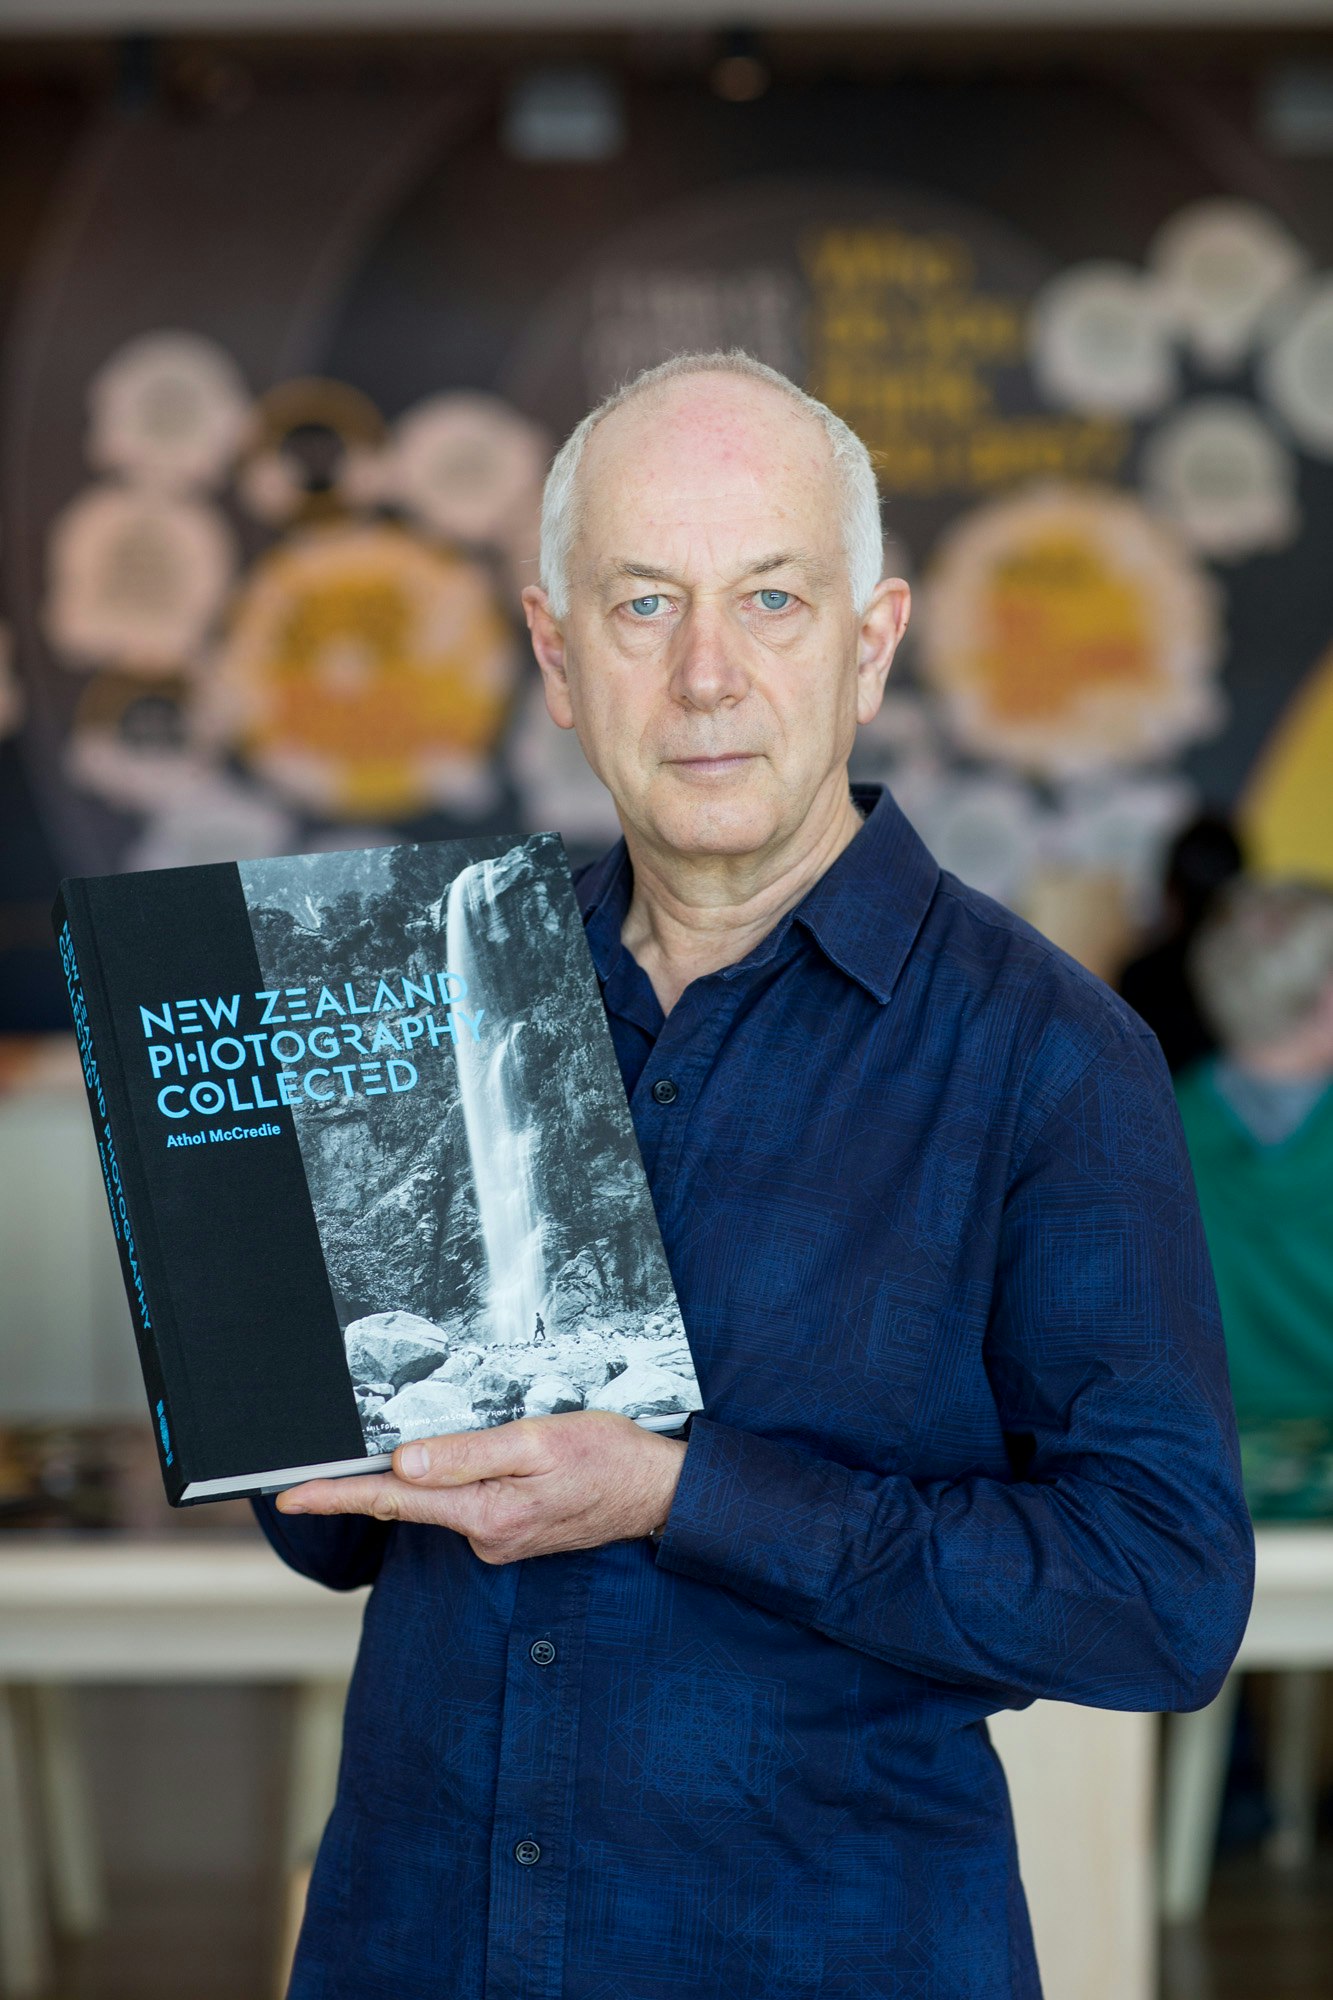 Author Athol McCredie holding a copy of his book, New Zealand Photography Collected.